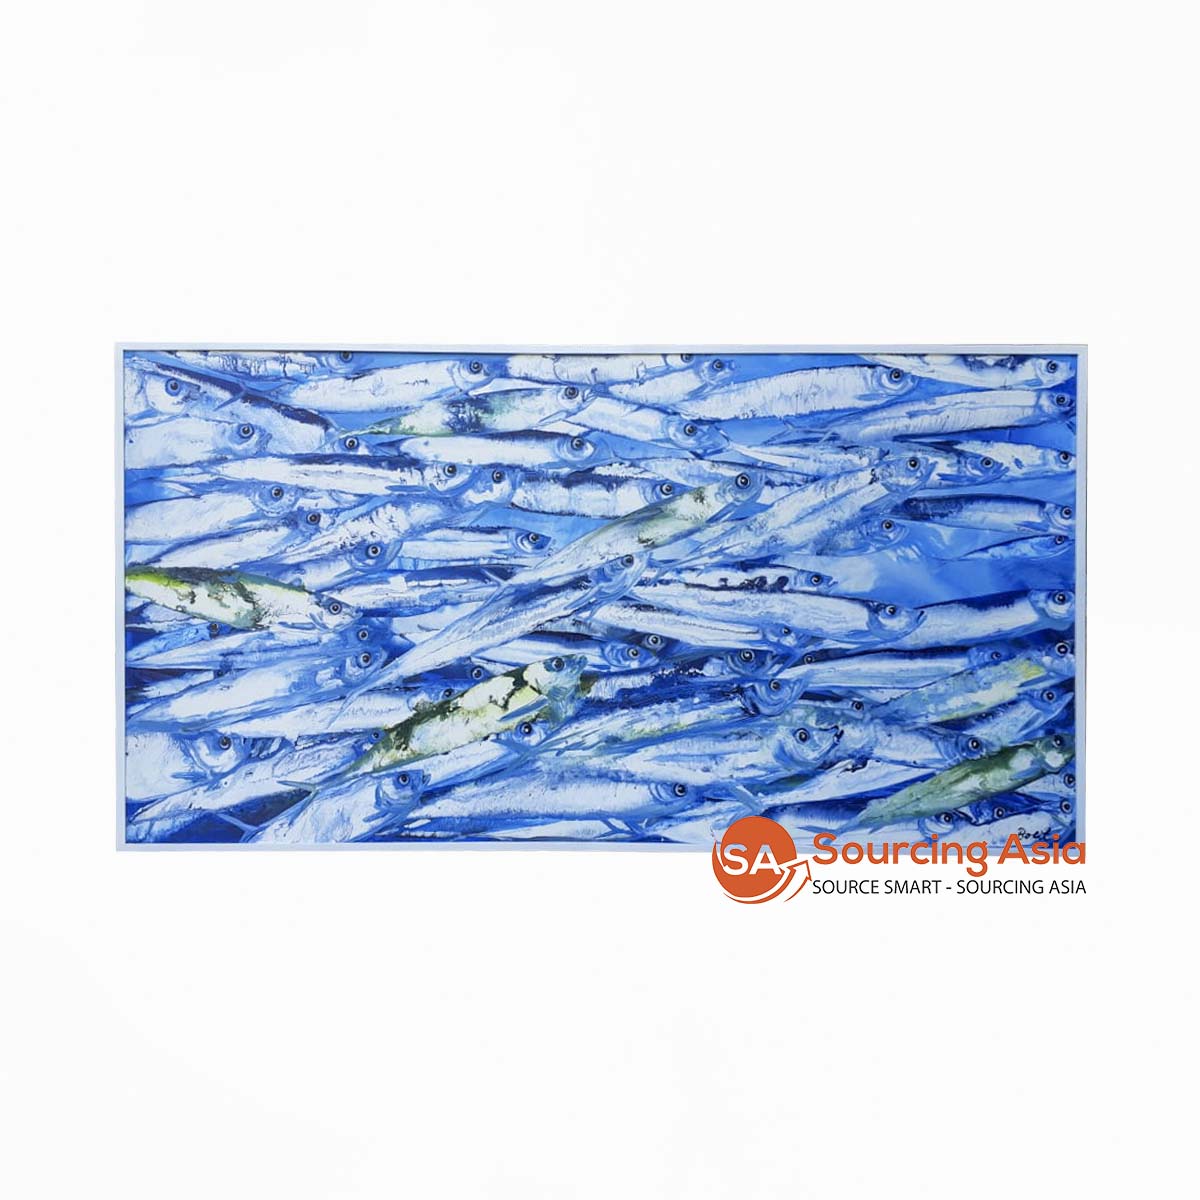 SDL141 FISH PAINTING WITH WHITE FRAME